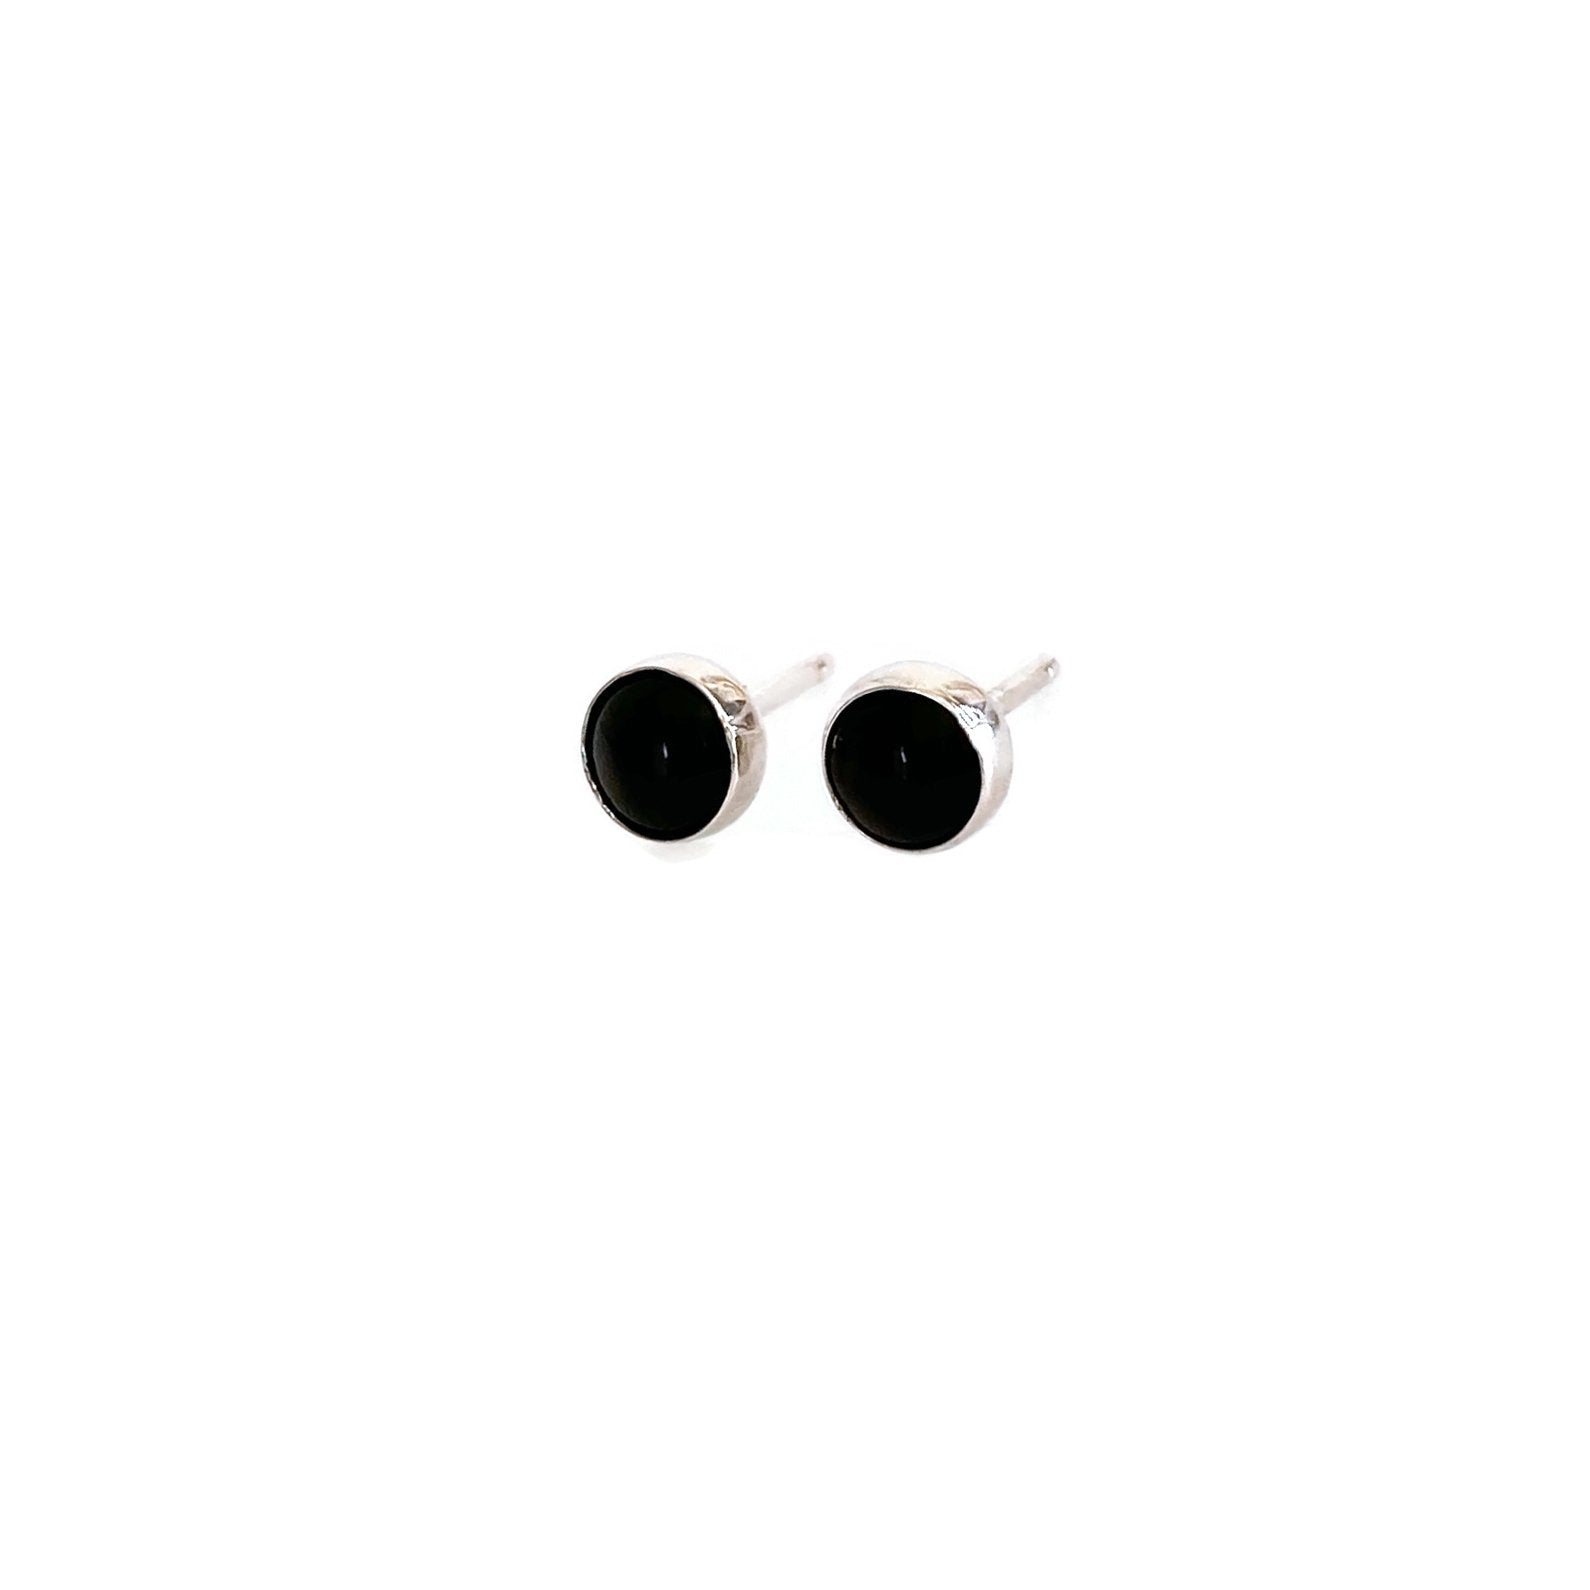 sterling silver black onyx stud earrings are 5mm.  Black Onyx helps to prevent the drain of personal energy. 